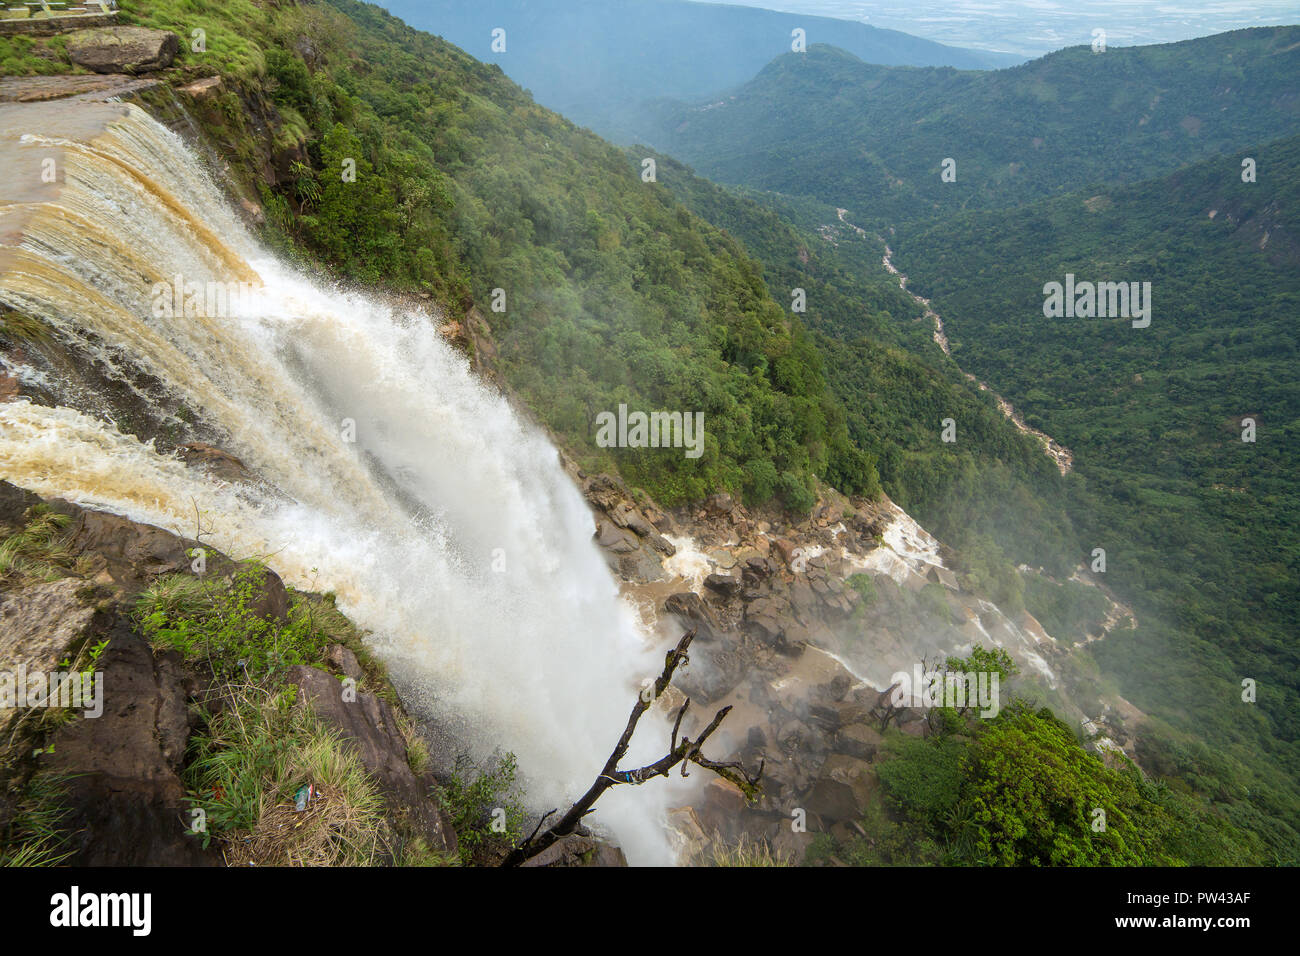 Seven Sisters waterfalls near the town of Cherrapunjee in Meghalaya, North-East India. Stock Photo